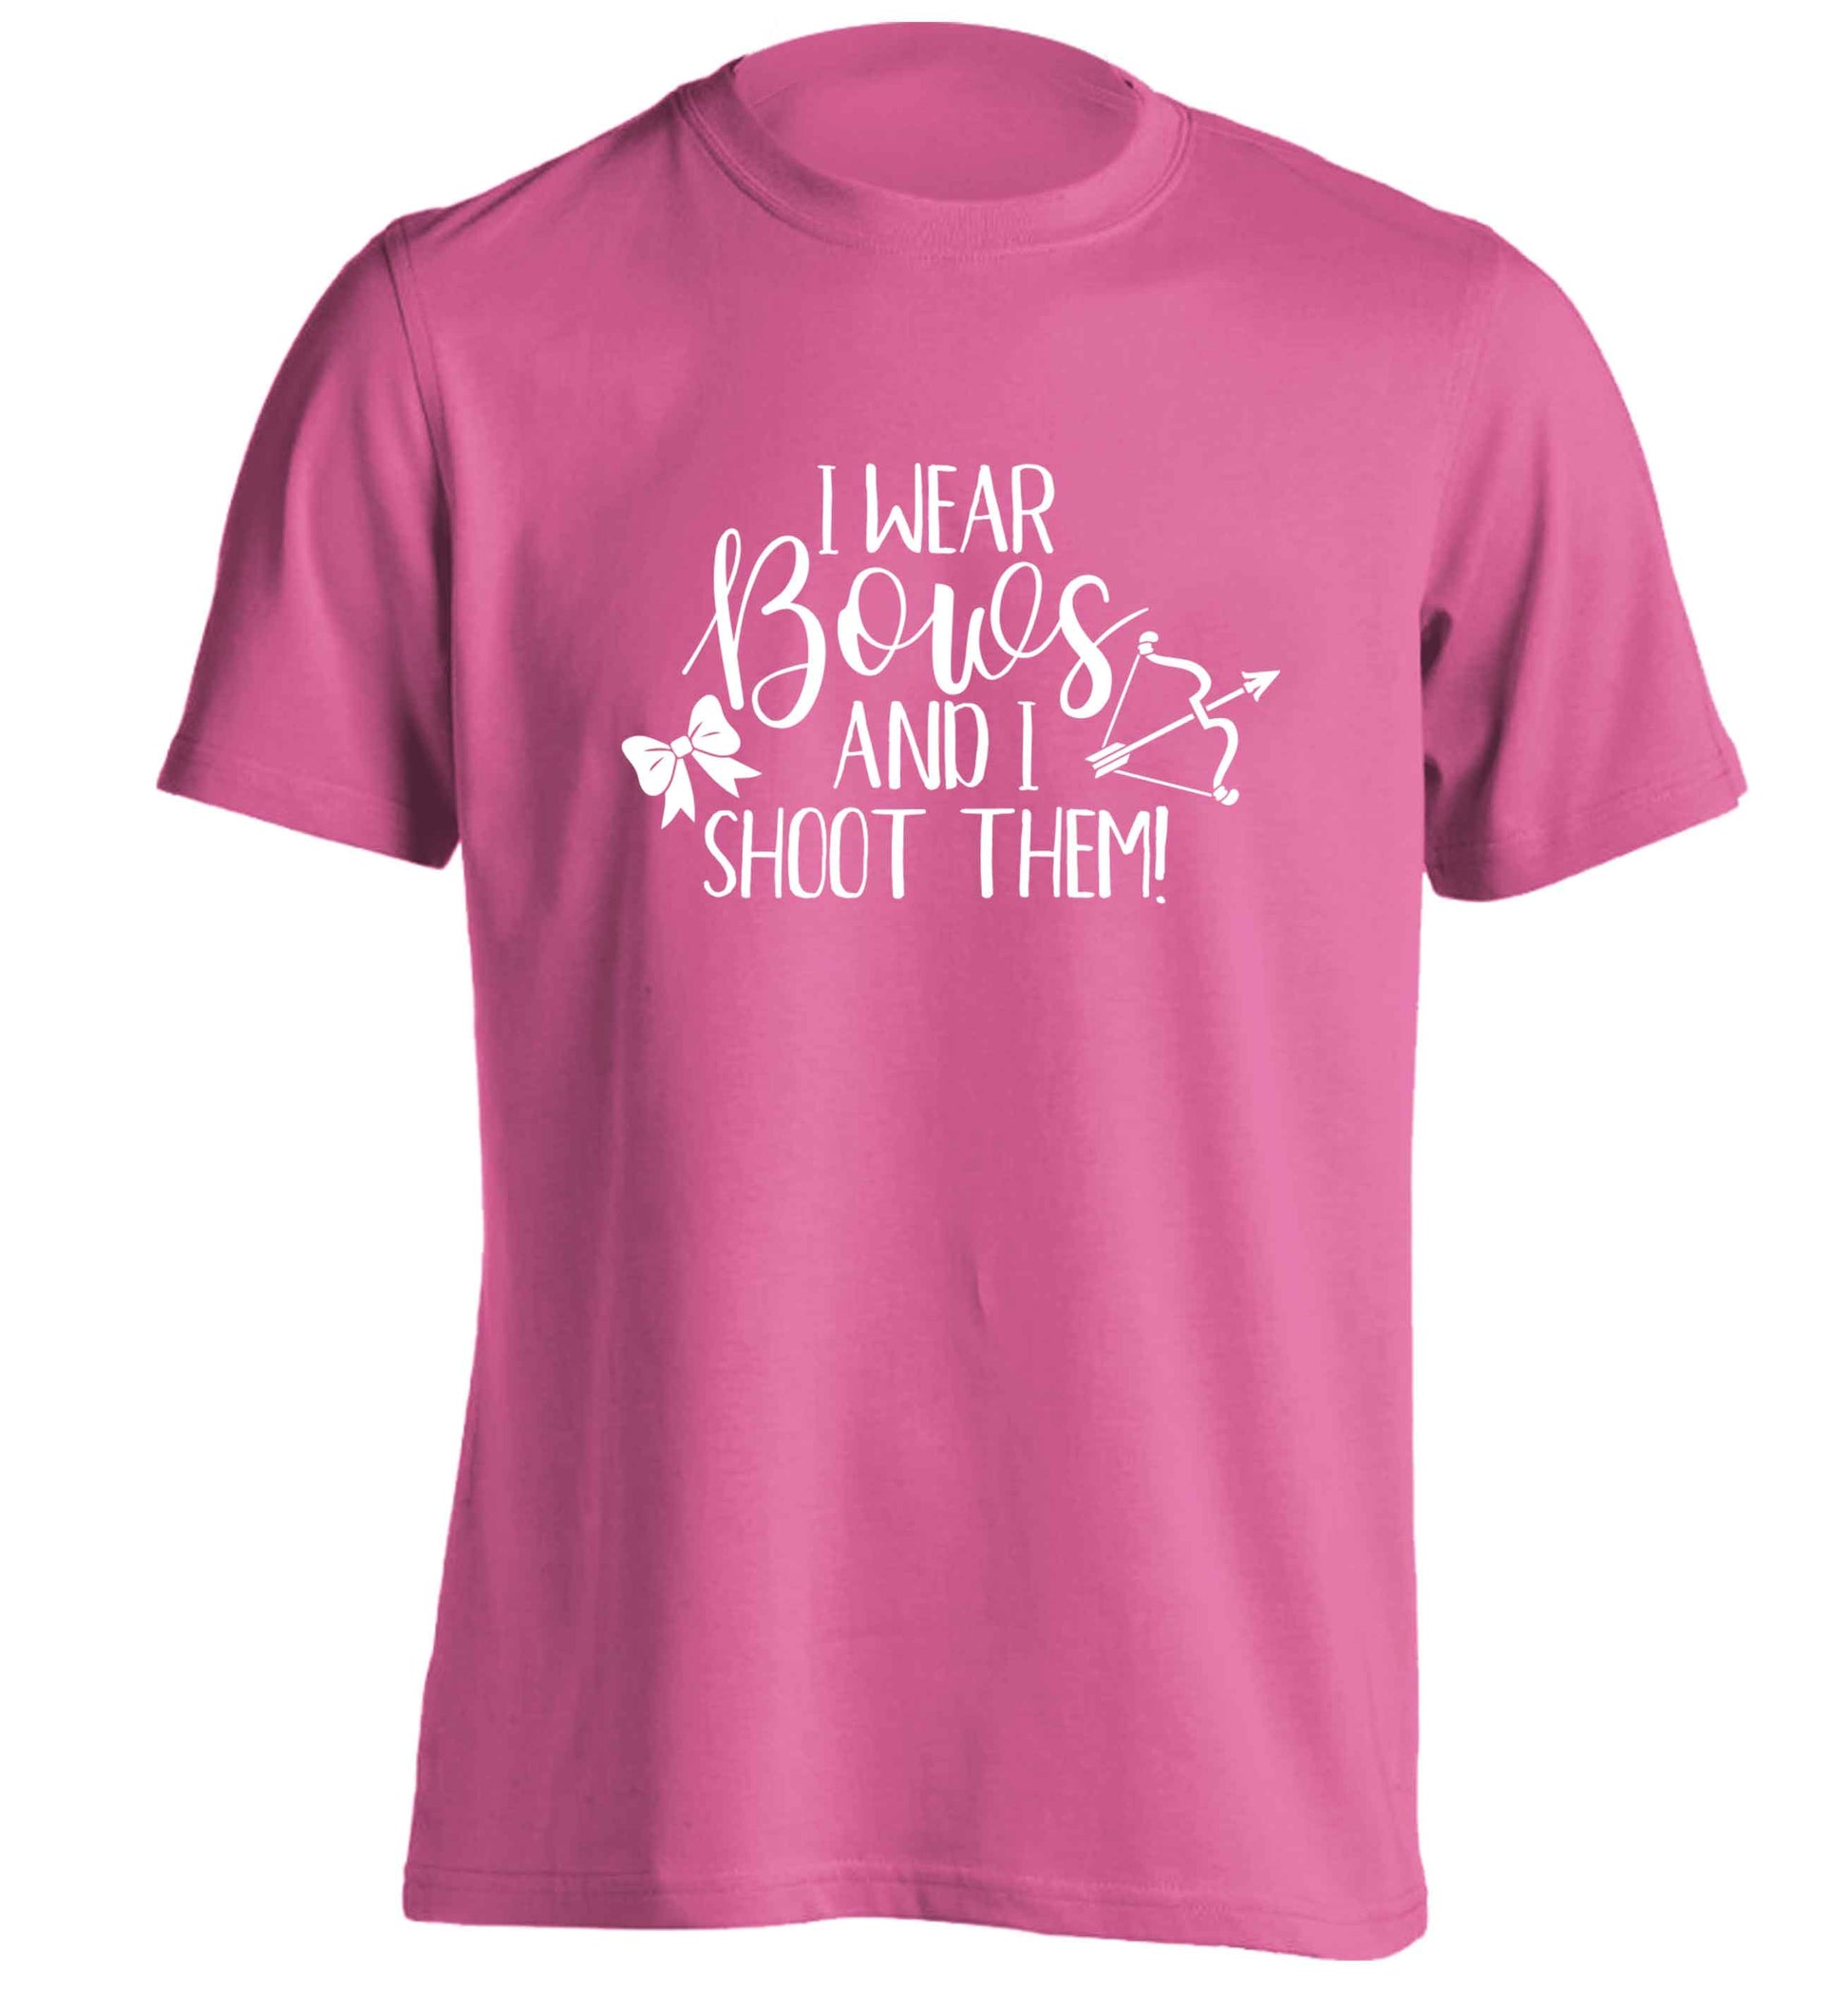 I wear bows and I shoot them adults unisex pink Tshirt 2XL